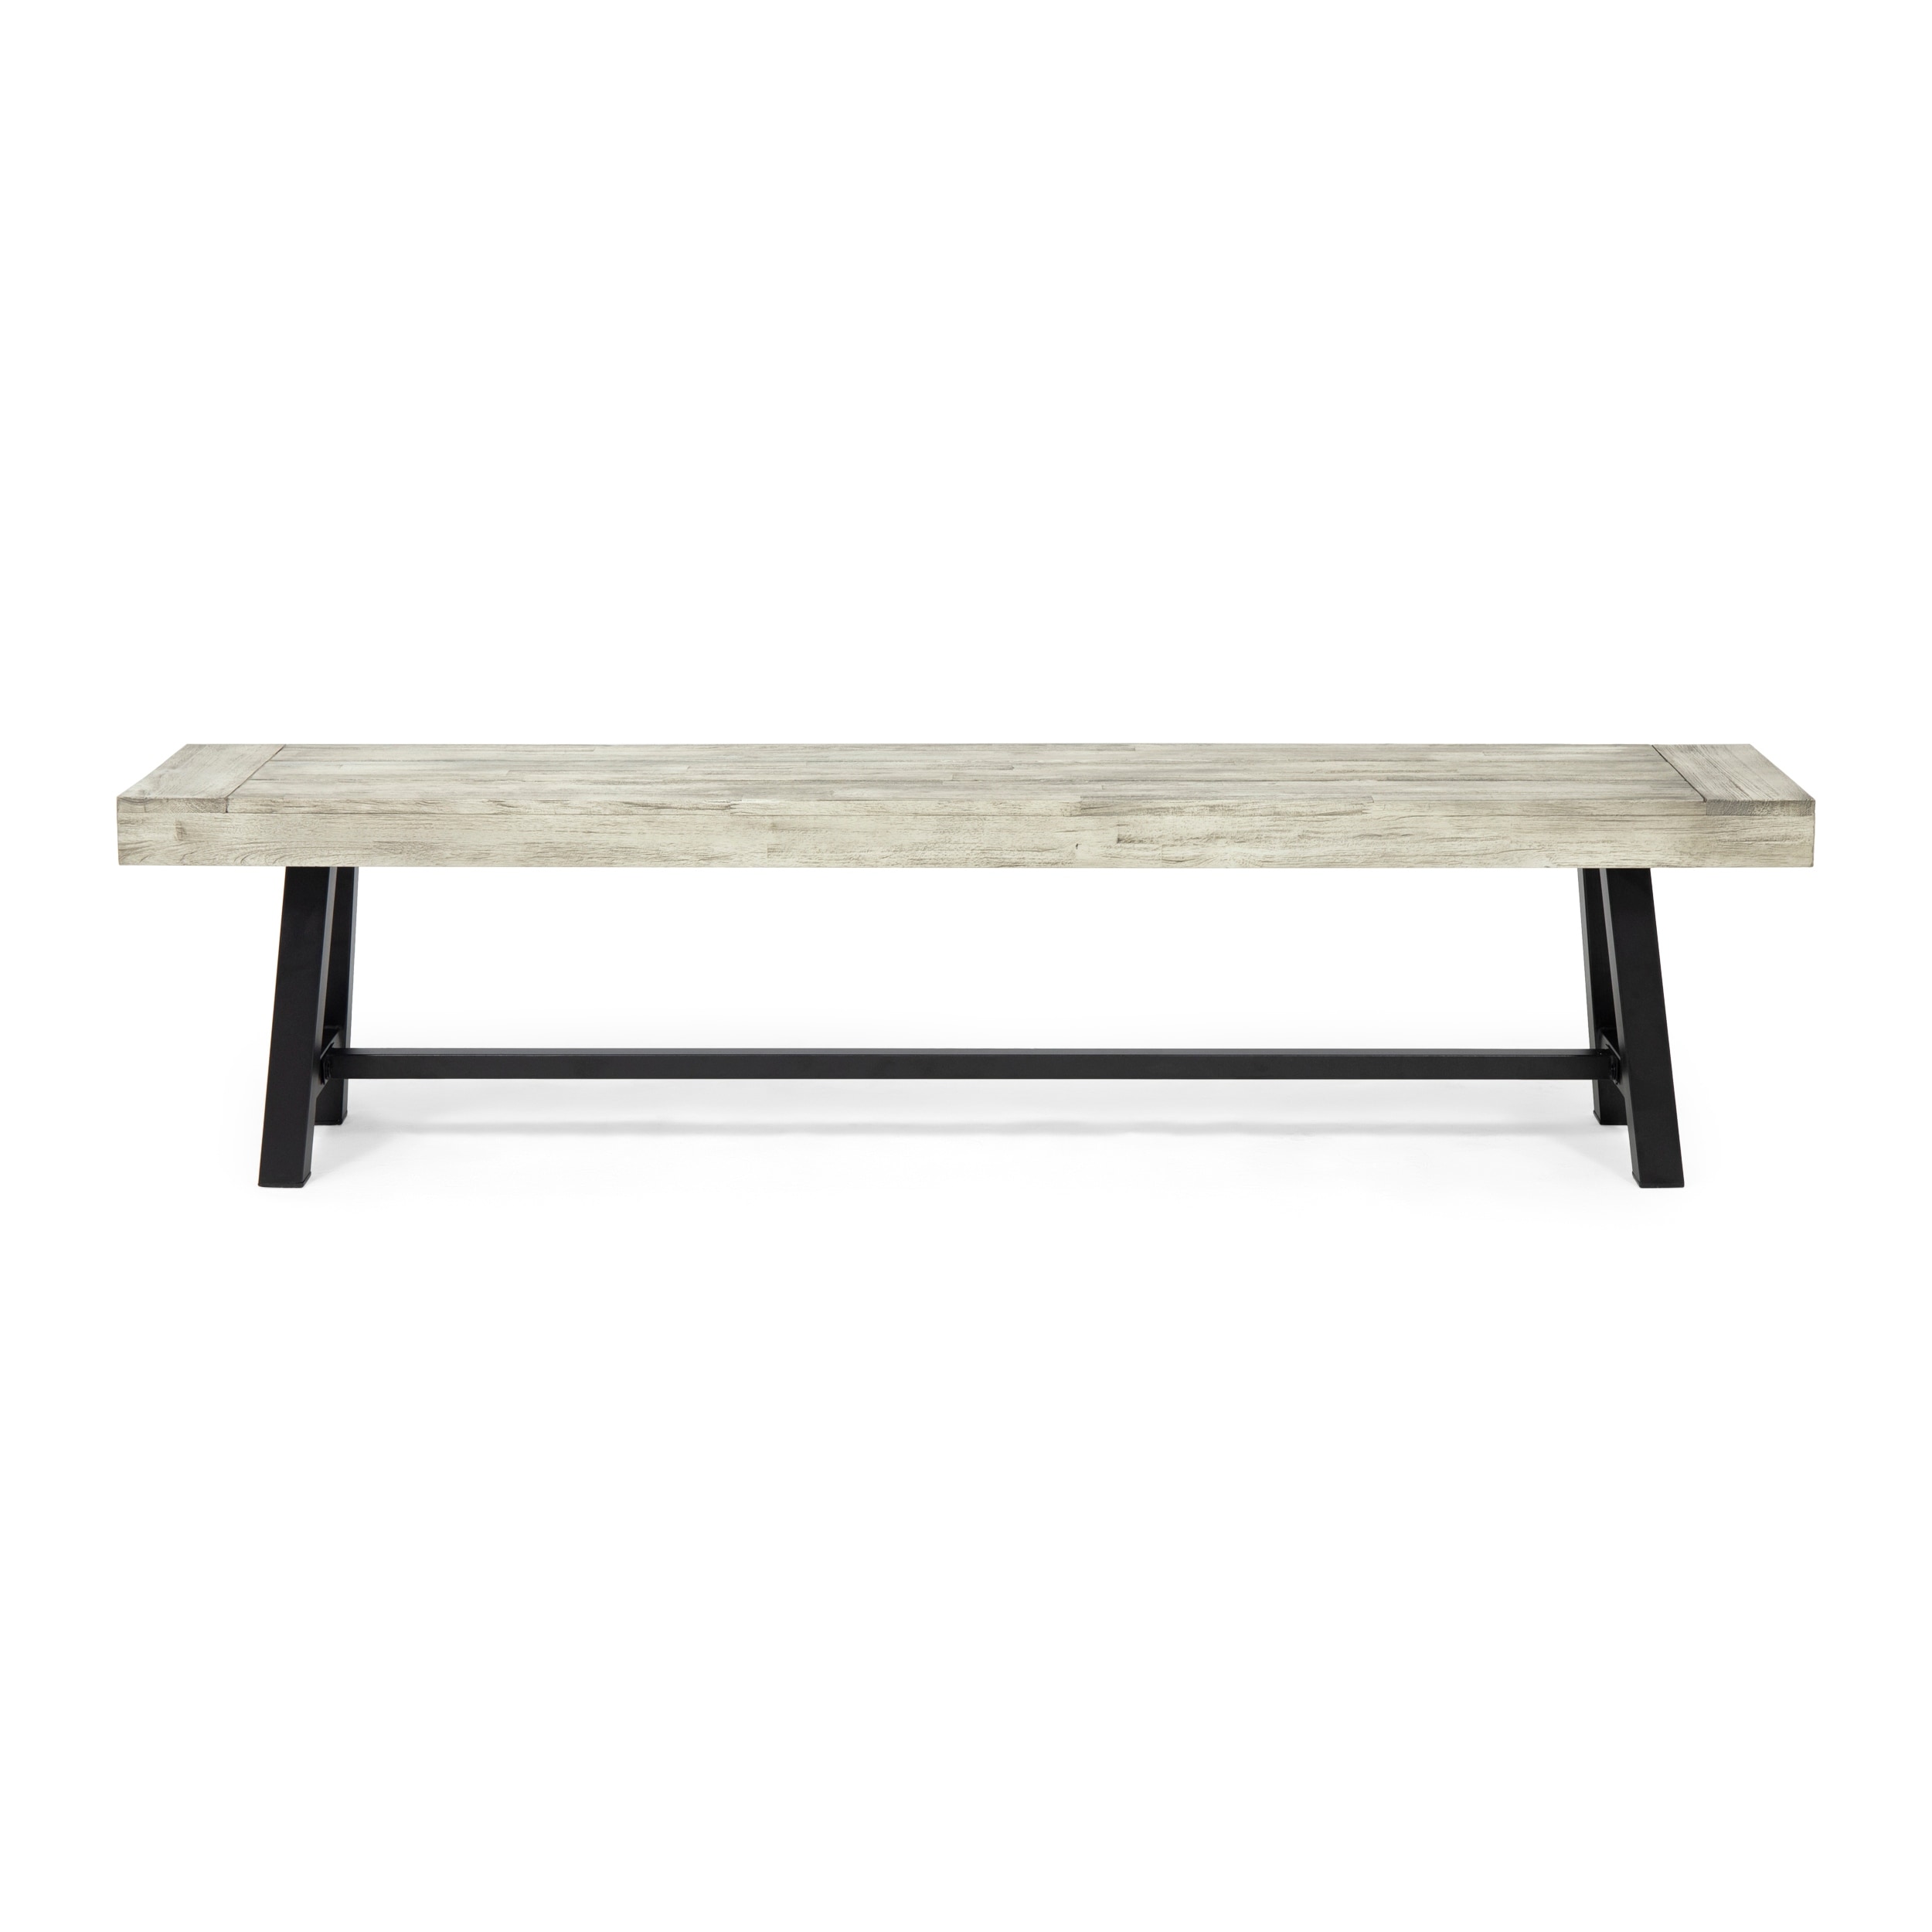 Carlisle Acacia Wood Outdoor Bench By Christopher Knight Home